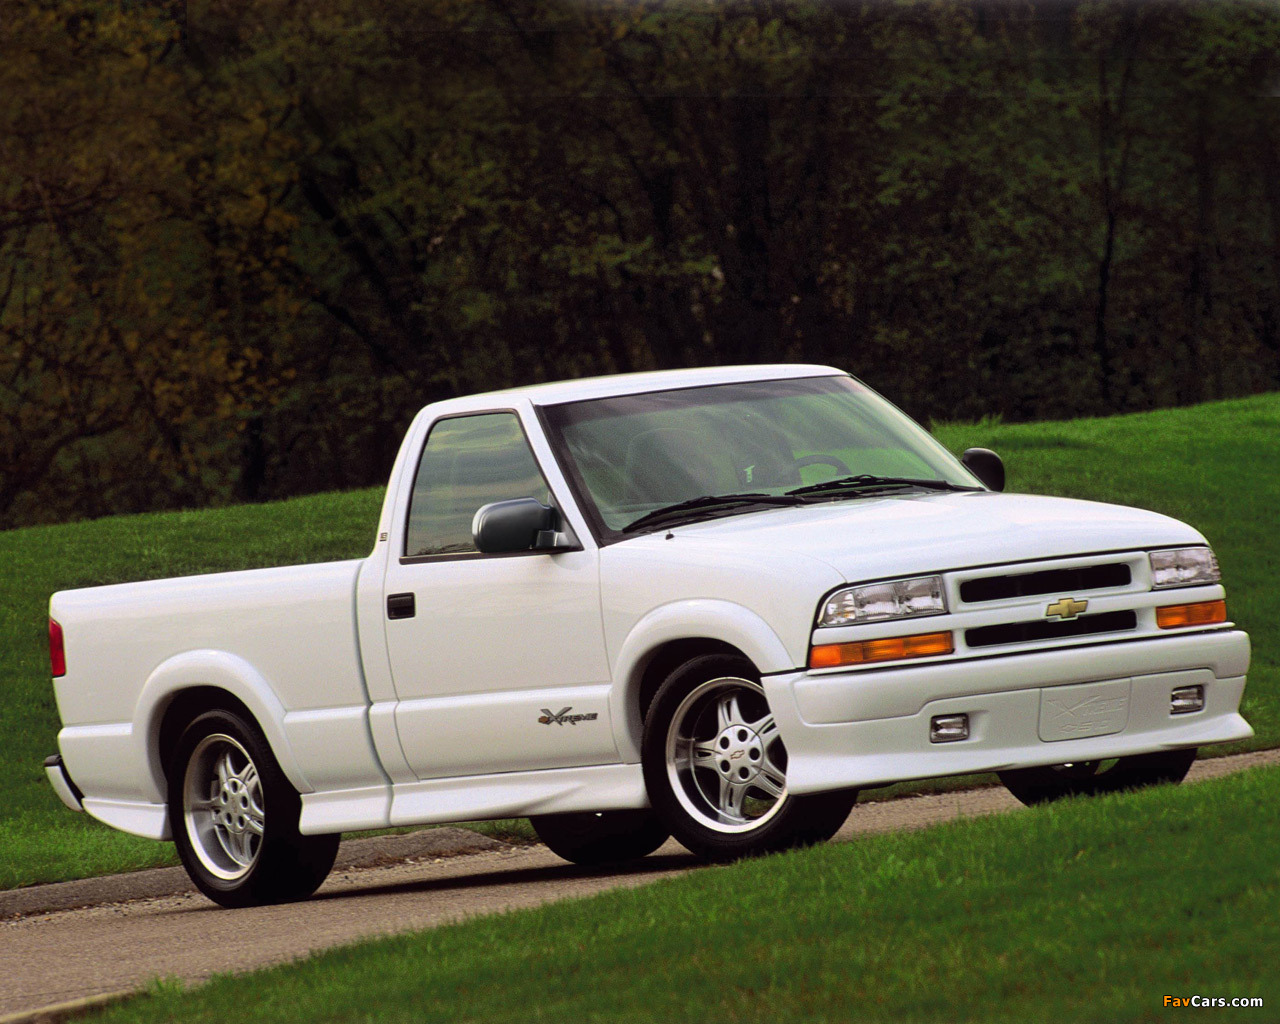 Chevrolet S-10 2WD LS Xtreme Regular Cab 1999 pictures (1280 x 1024)